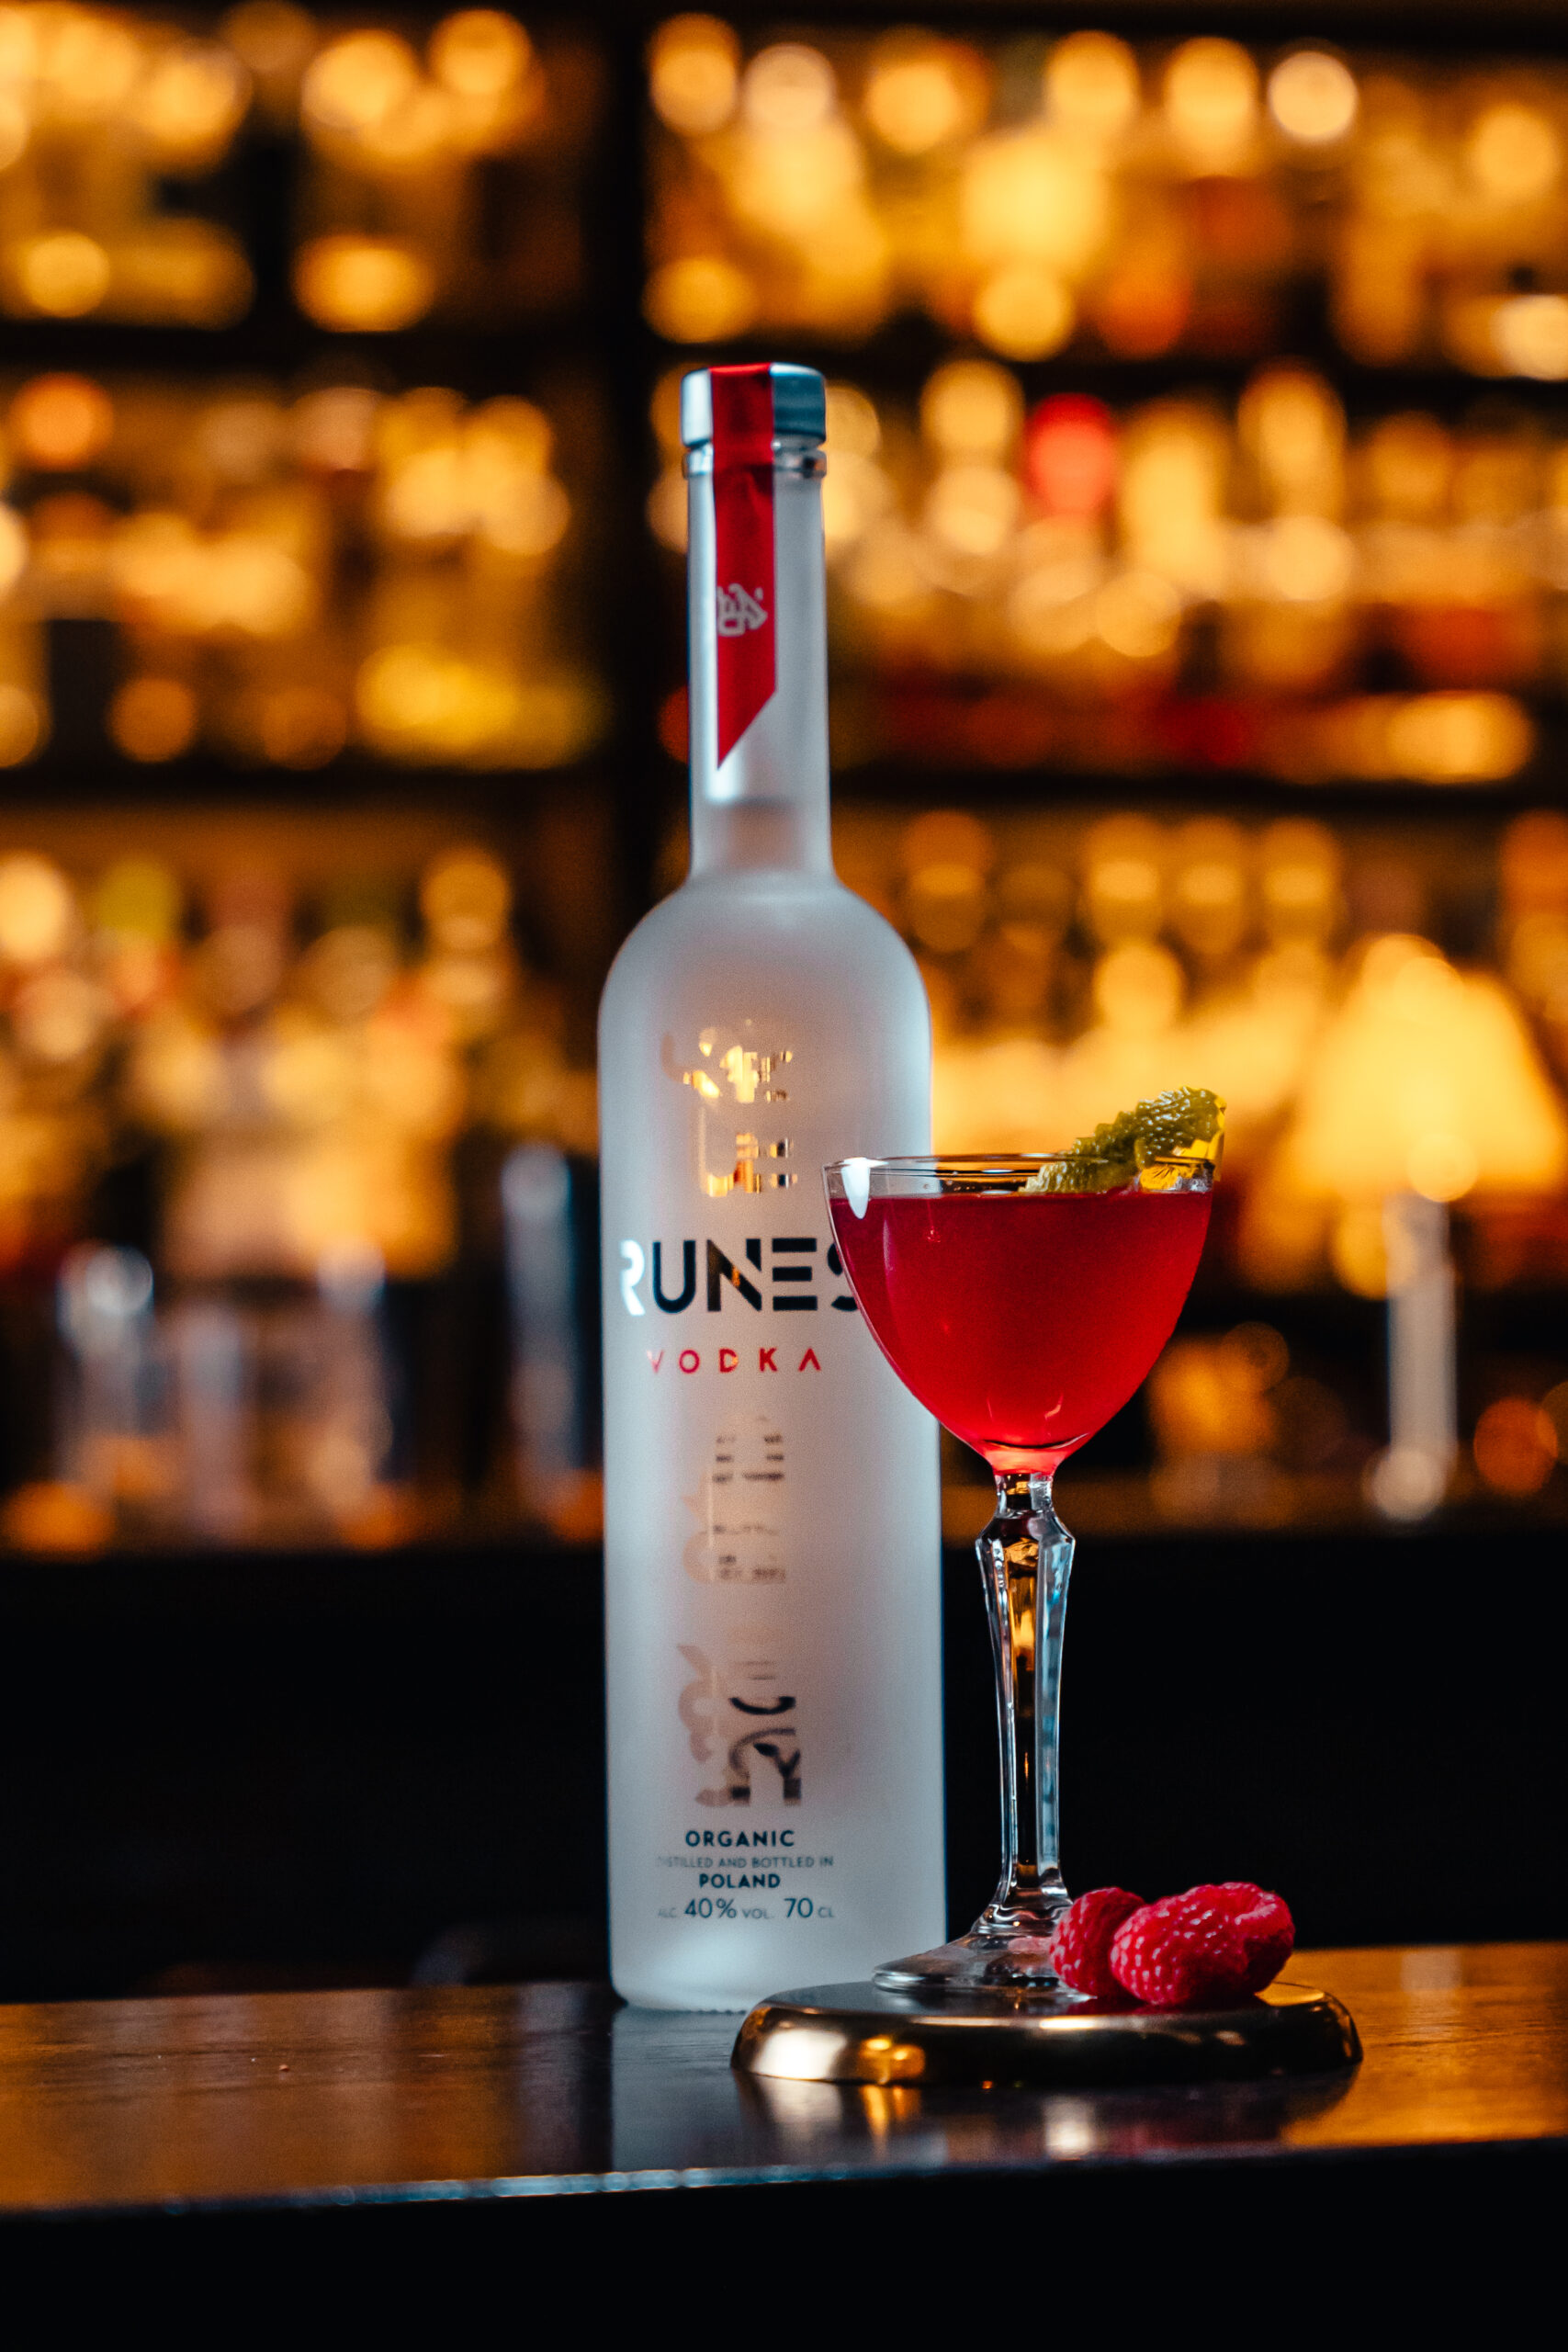 The Cosmopolitan is a tart-sweet, refreshing cocktail whose modern recipe - based on the basic structure of a sour - consists of flavored RUNES vodka, orange liqueur, lime and cranberry juice.